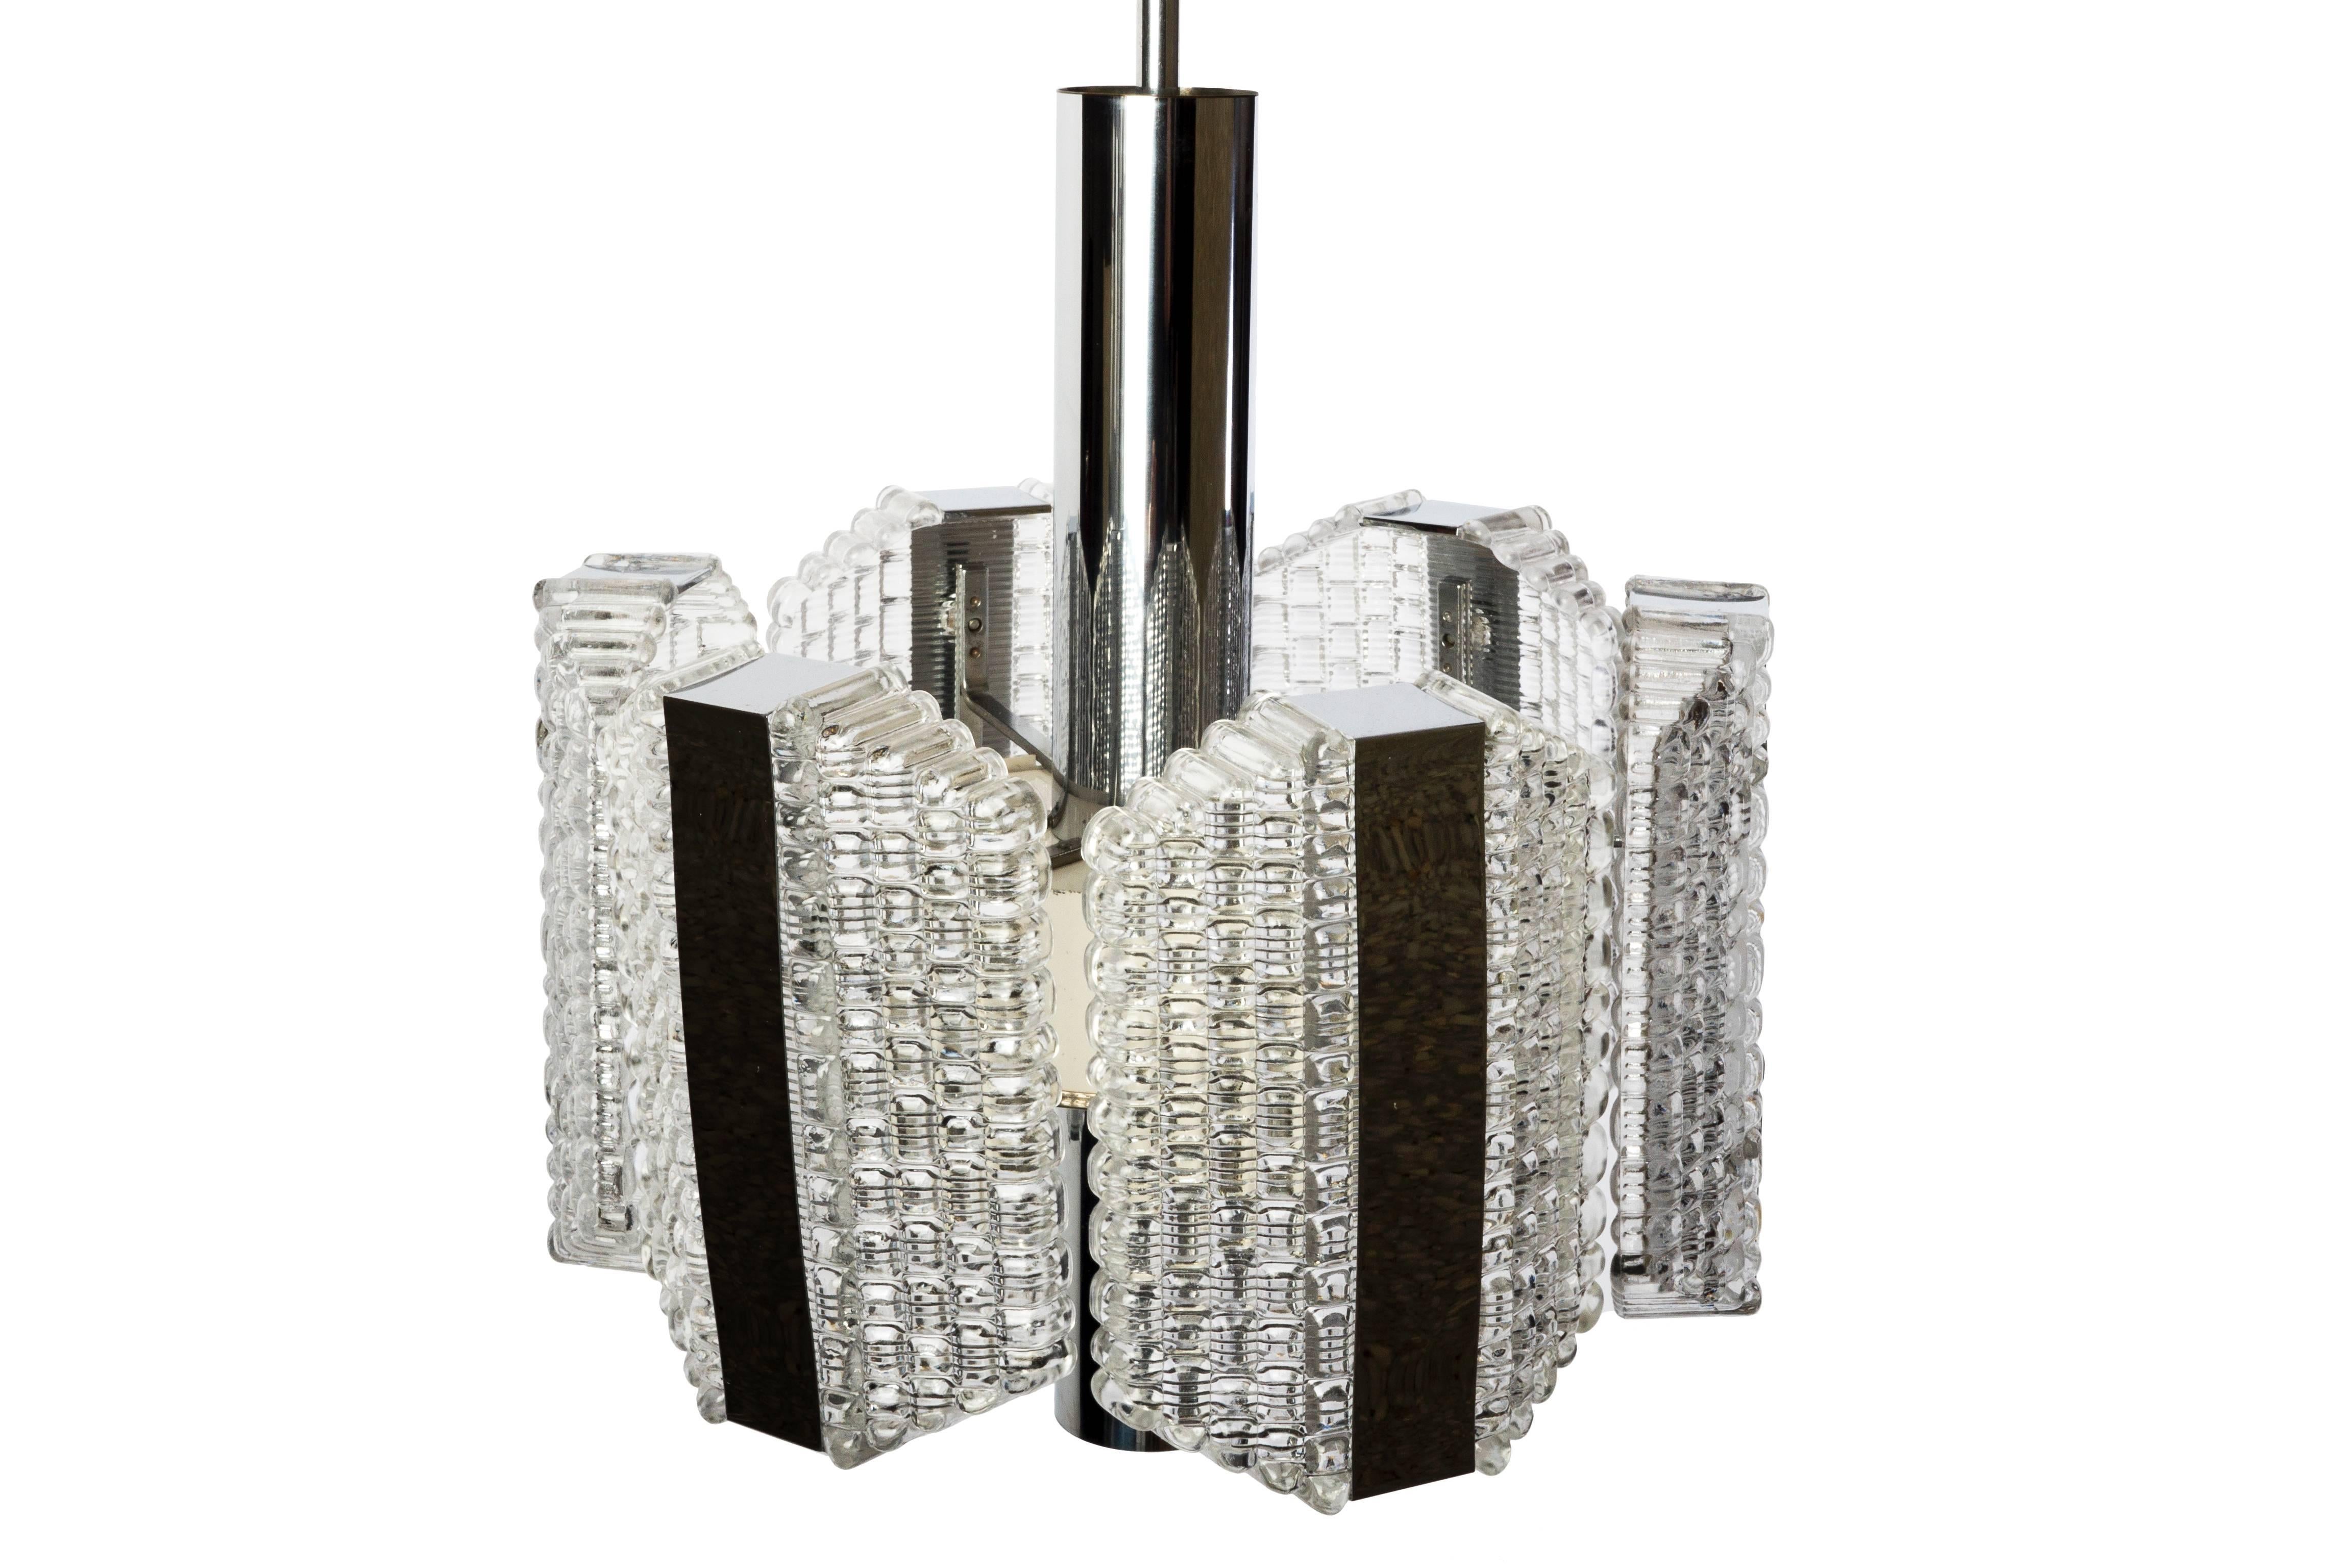 This sensational Mid-Century Modernist chandelier was designed by Kaiser Leuchten. It features a hexagonal shape, textured relief glass design and chrome banding detail. It has been completely rewired and is in excellent condition.